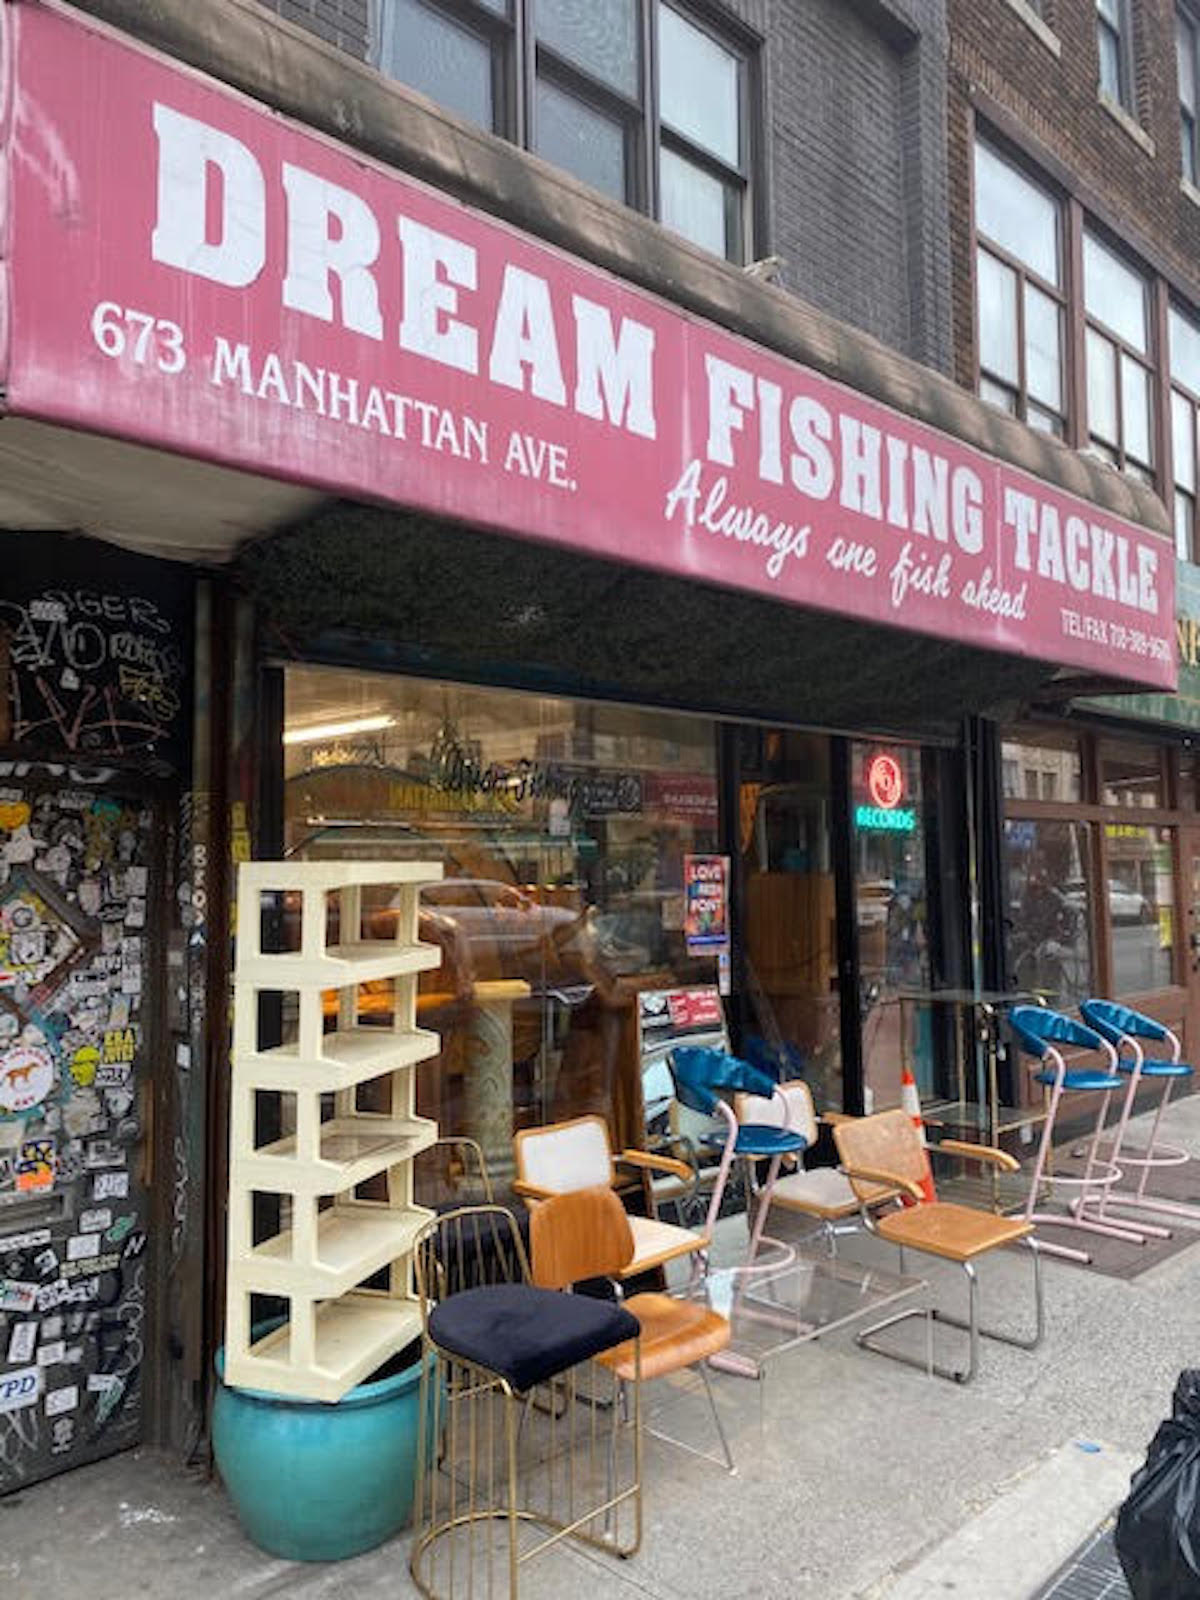 Dream Fishing Tackle: Greenpoint's Quirkiest Brick and Mortar